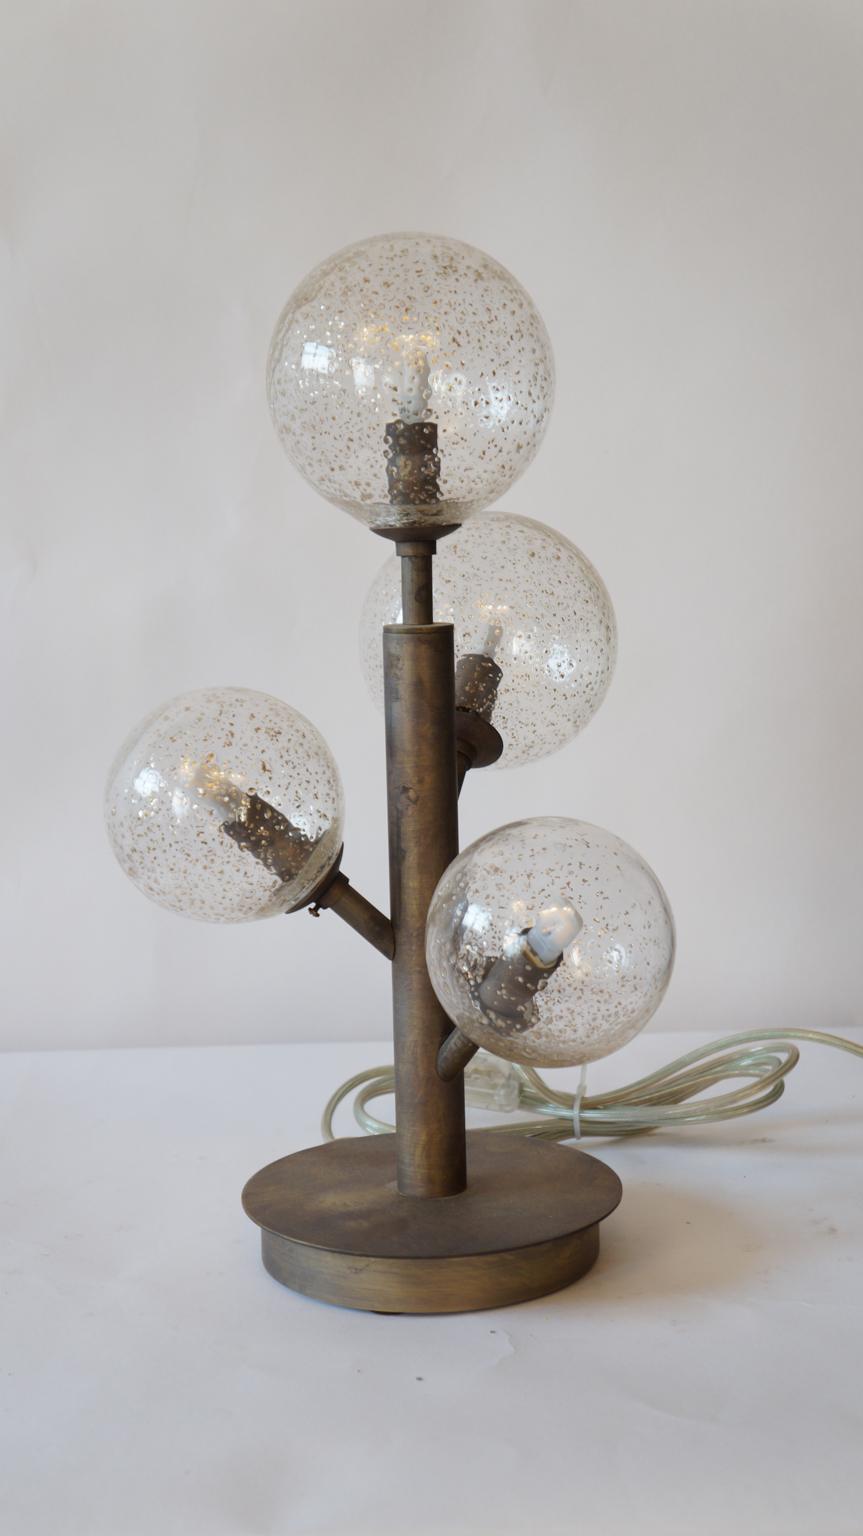 Alberto Donà Mid-Century Modern Crystal Mika One Murano Glass Table Lamp, 1998 For Sale 2